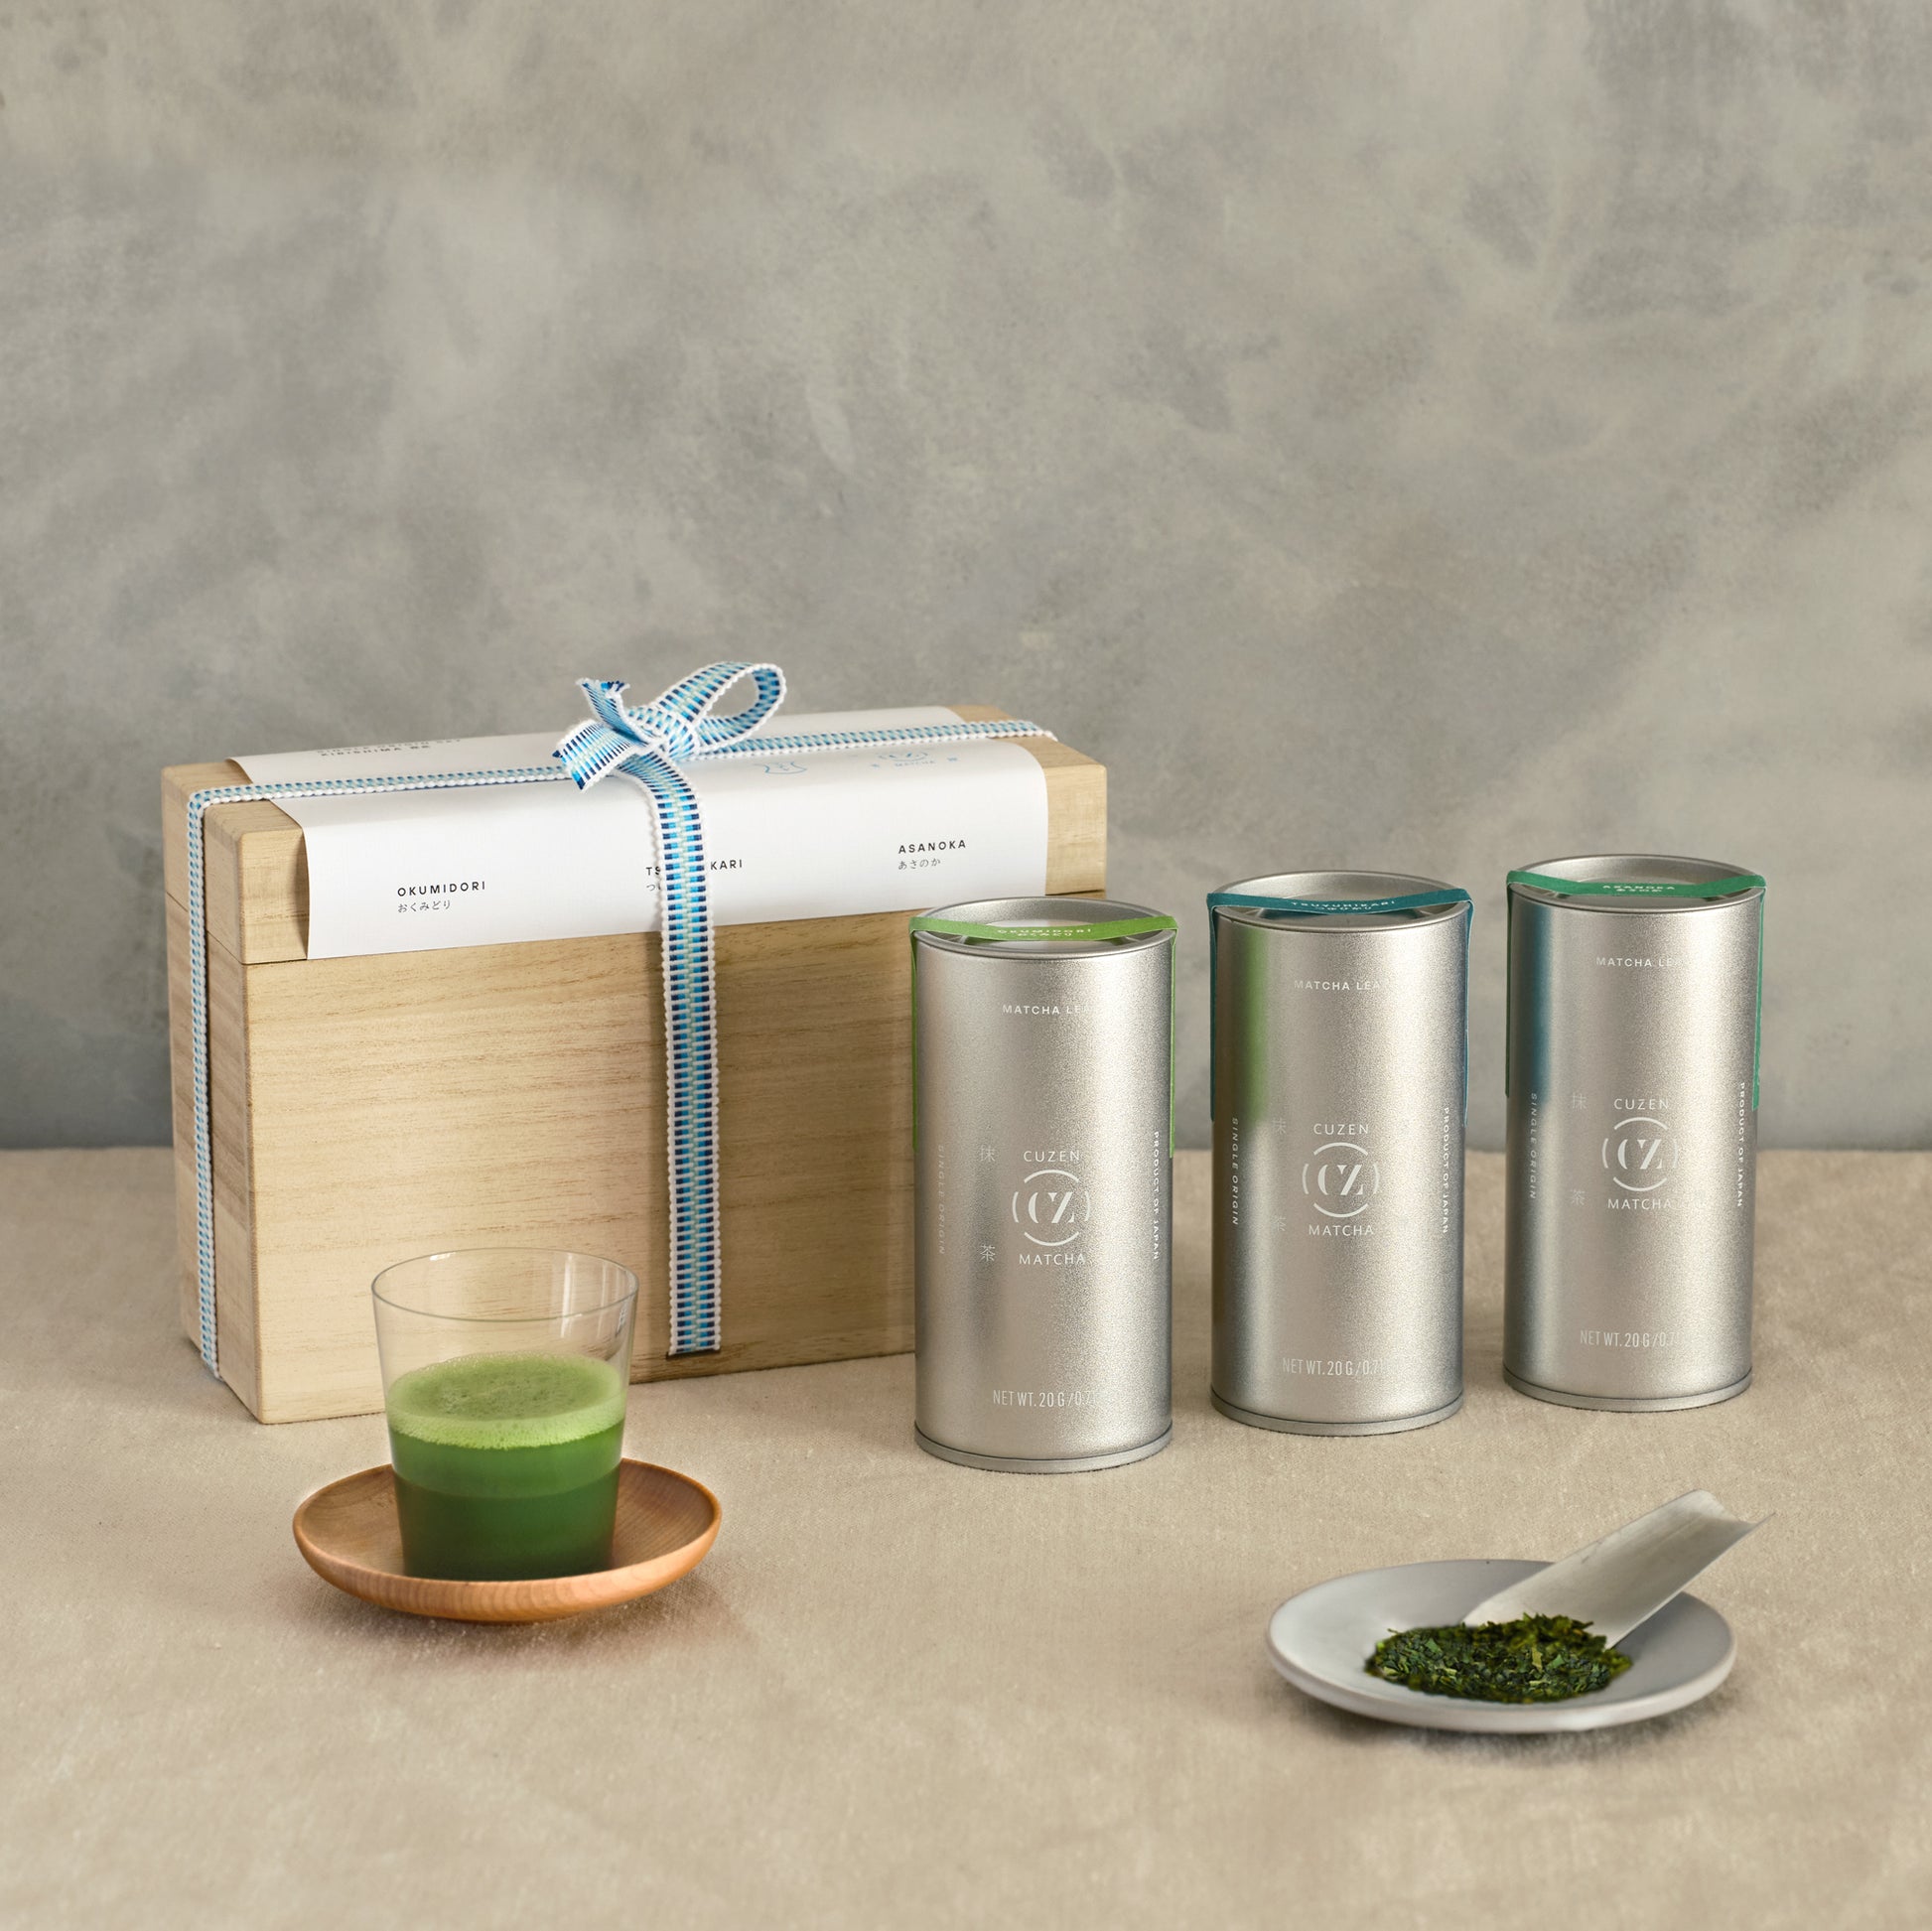 Three canisters of Single Origin Matcha in front of the kiri bako and a saucer of deep green whole leaf matcha.